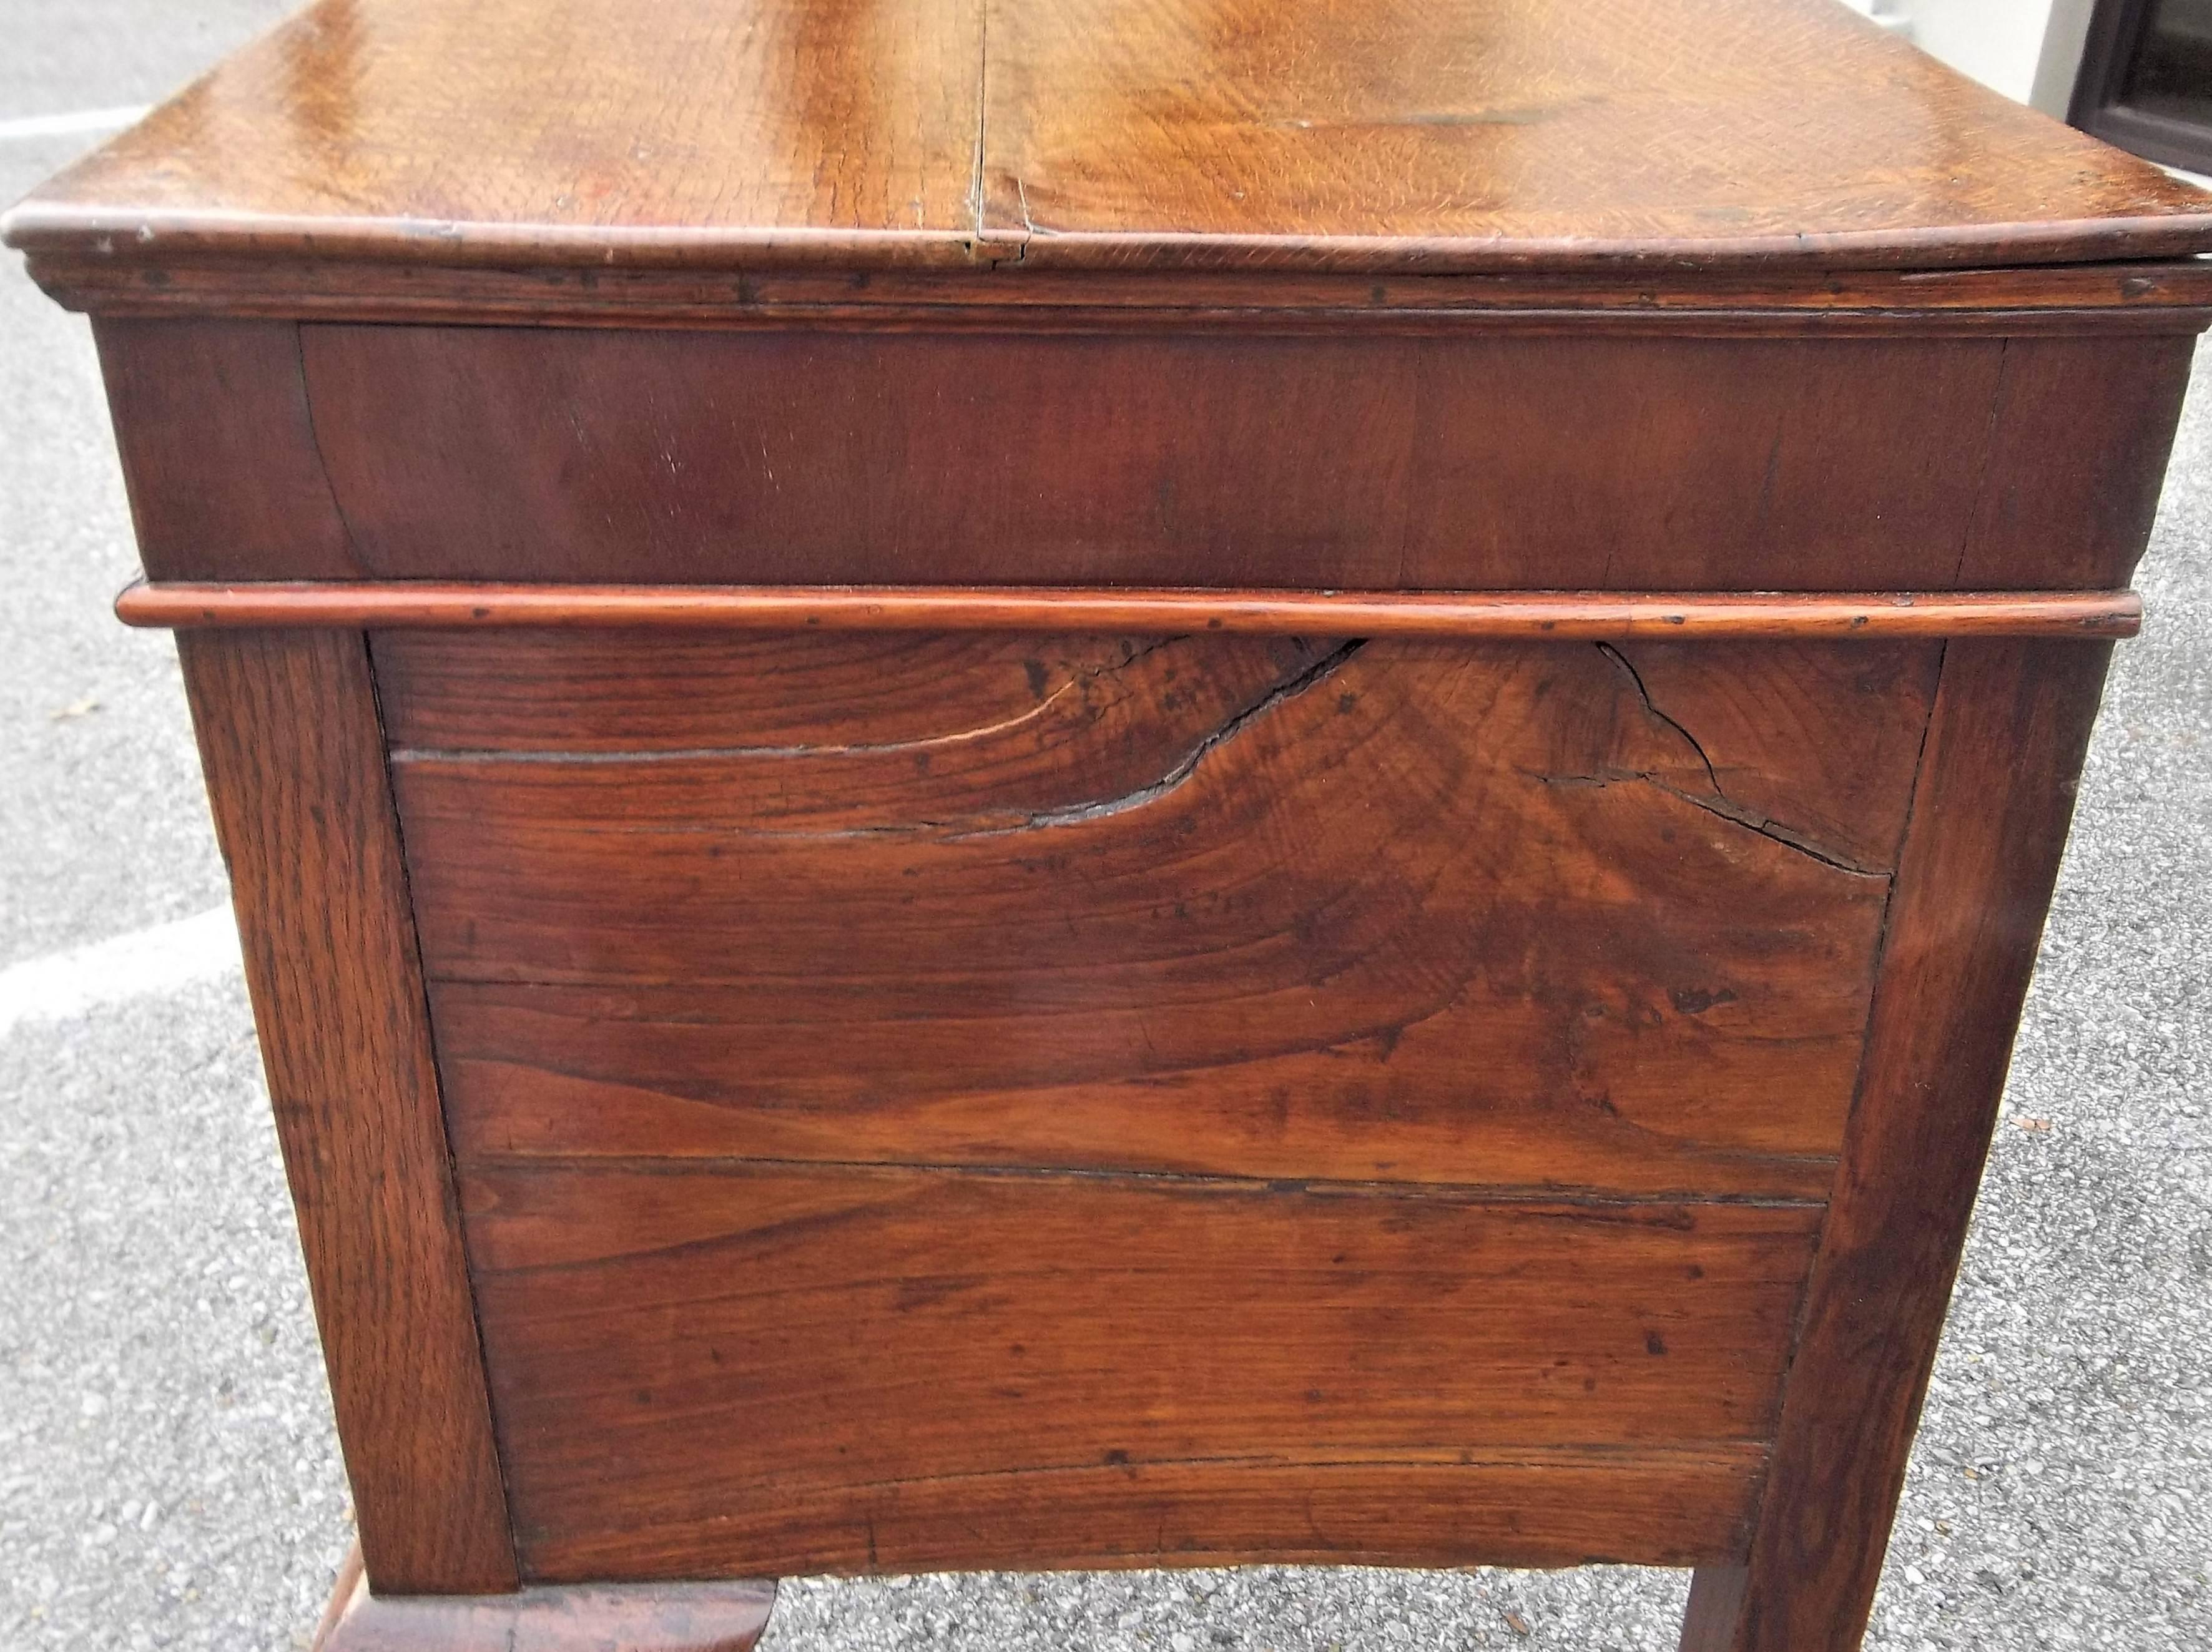 19th Century Tall Welsh or English Fan Inlaid Oak and Mahogany Dresser Base or Sideboard